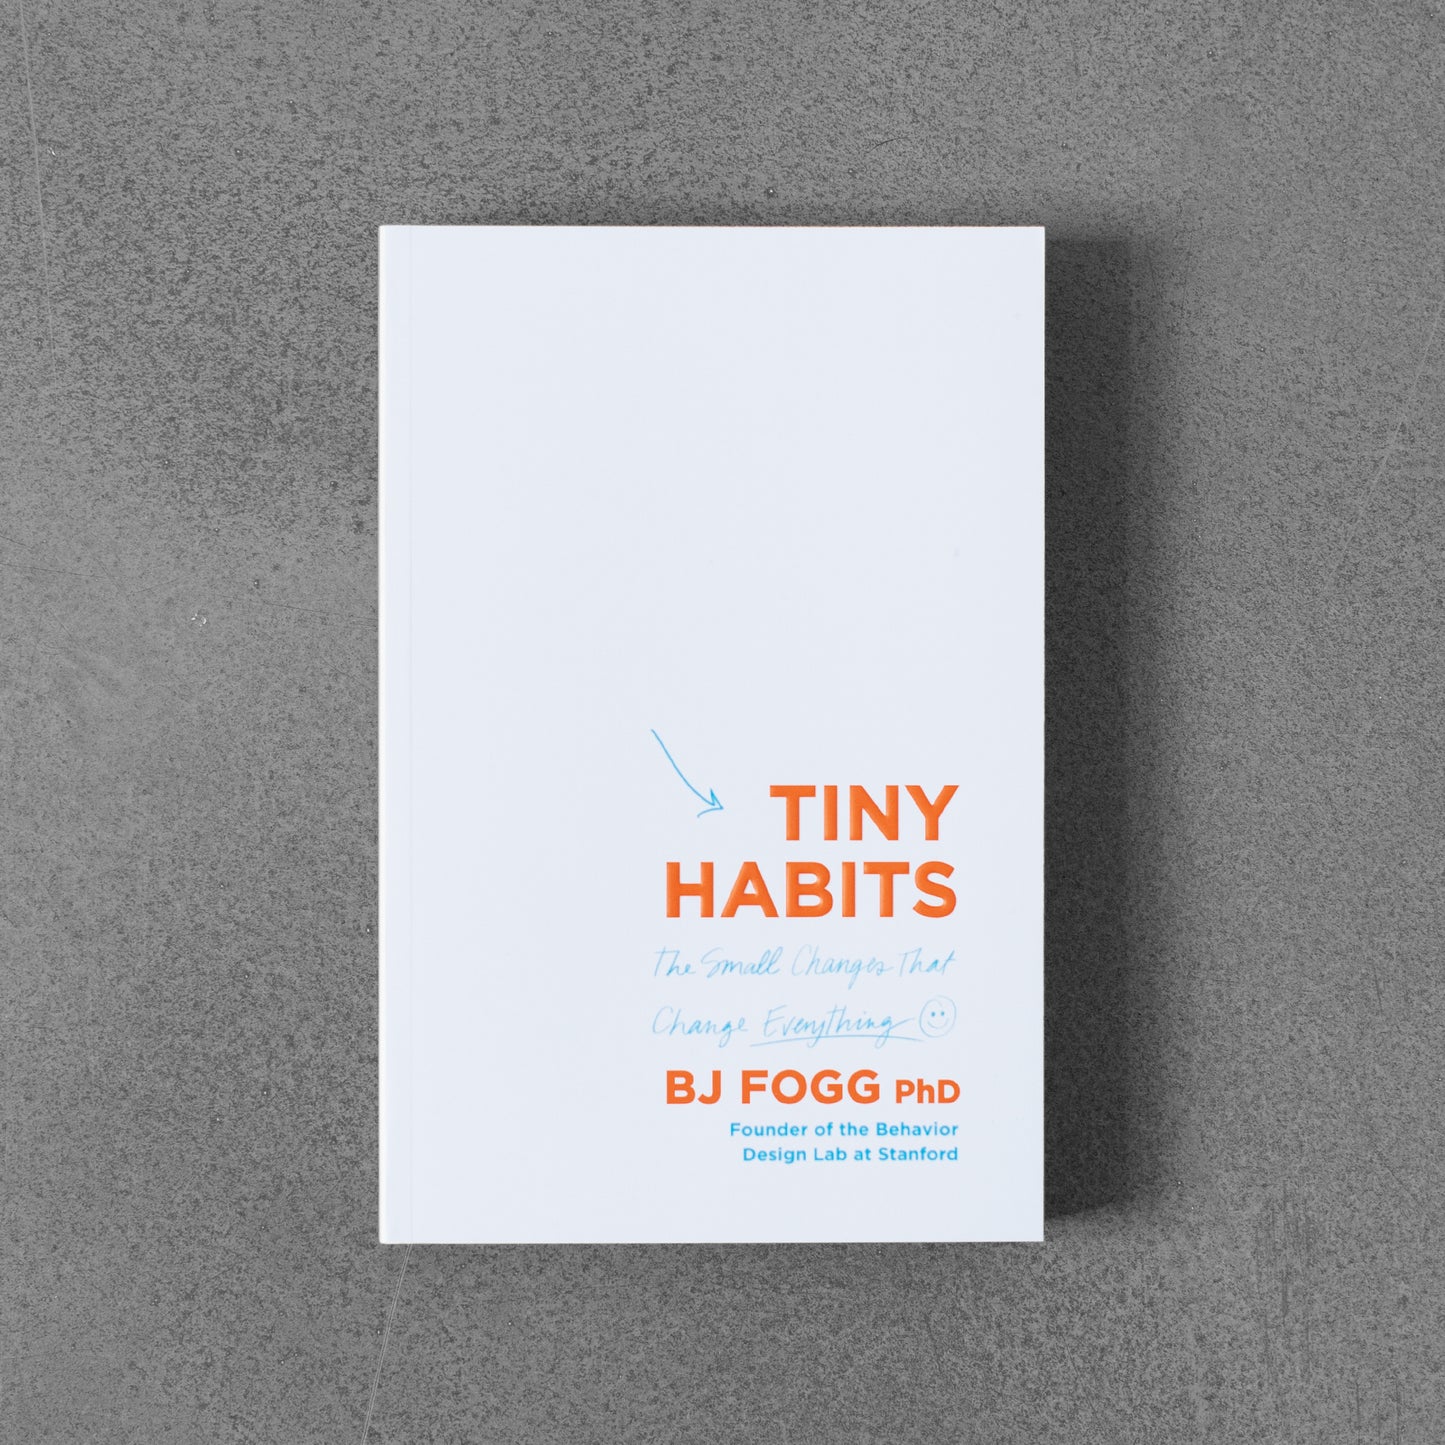 Tiny Habits: The Small Changes that Change Everything - BJ Fogg PhD.